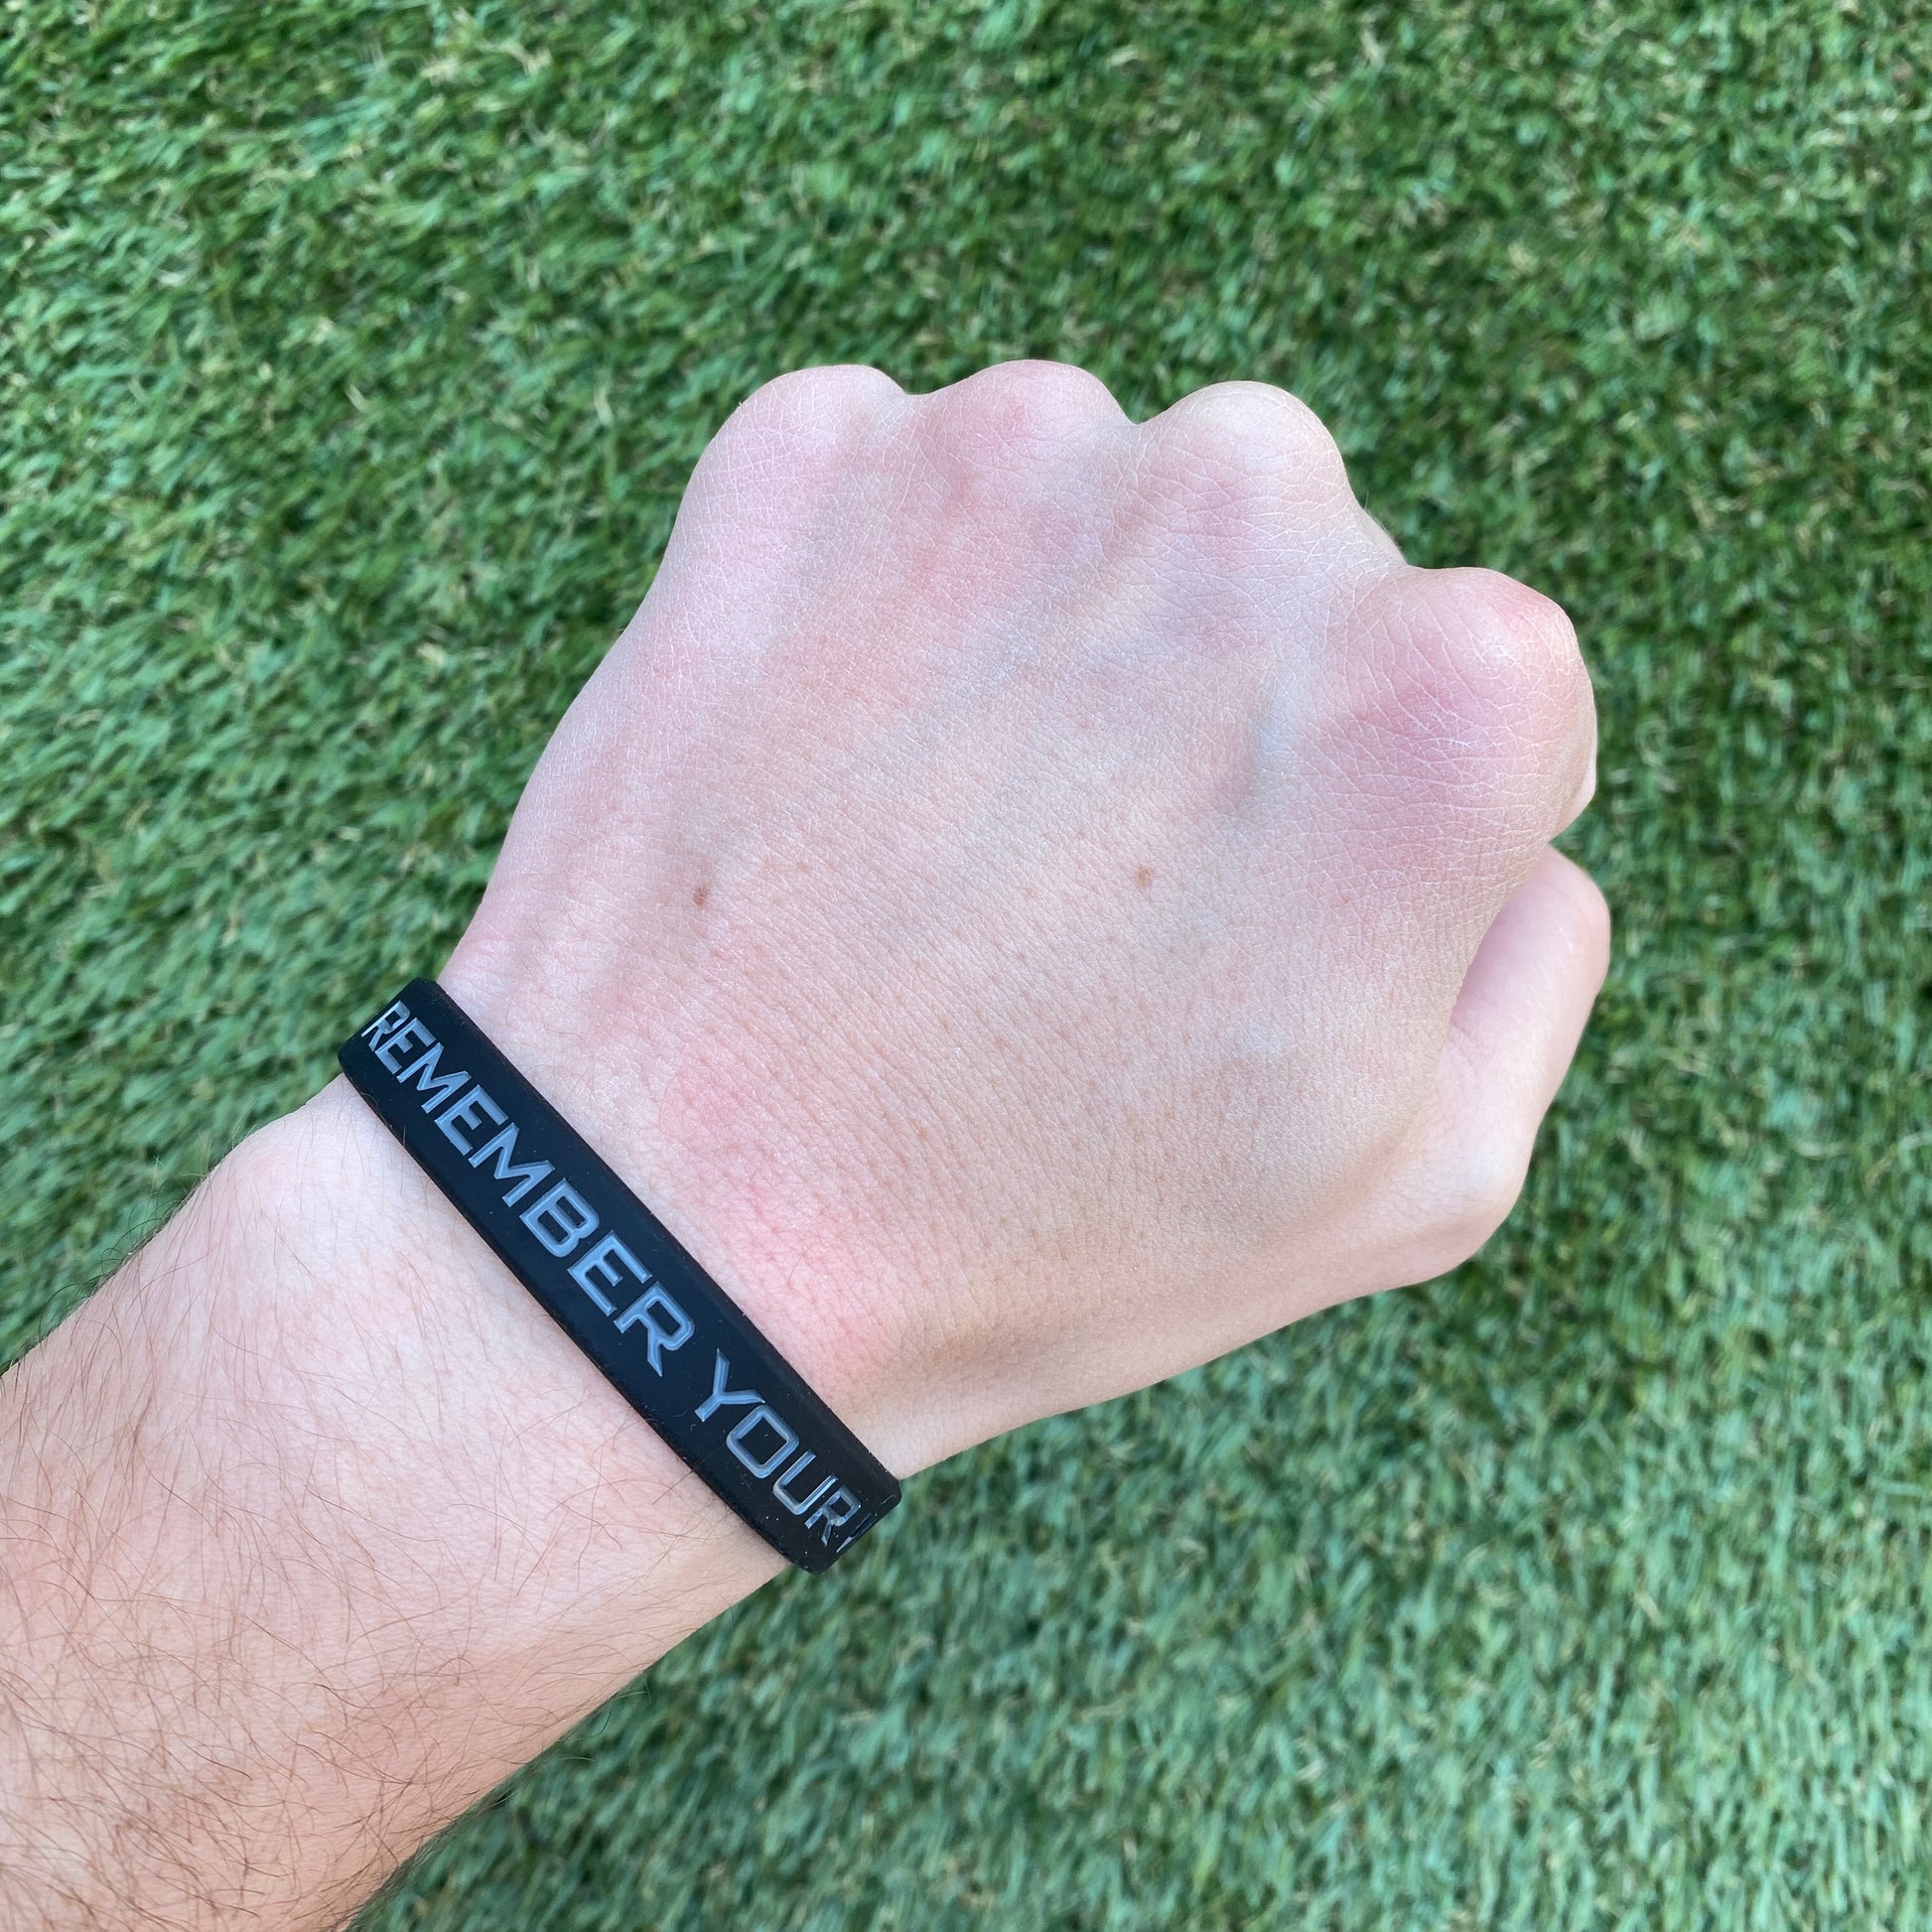 REMEMBER YOUR WHY Wristband